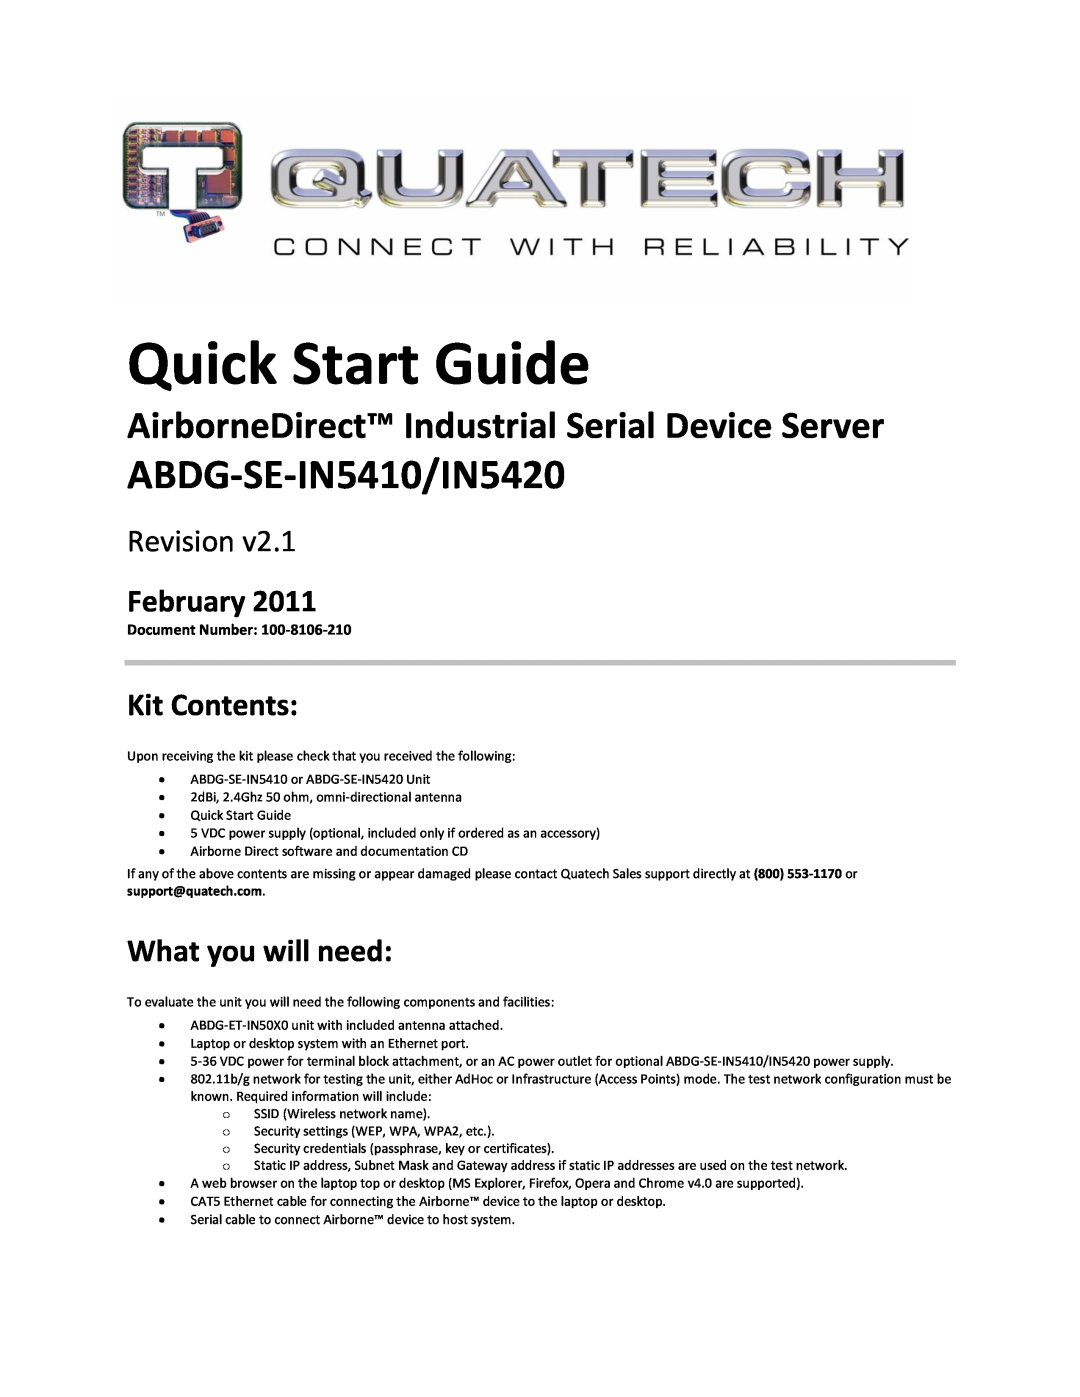 Quatech quick start February, Kit Contents, What you will need, Quick Start Guide, ABDG-SE-IN5410/IN5420, Revision 